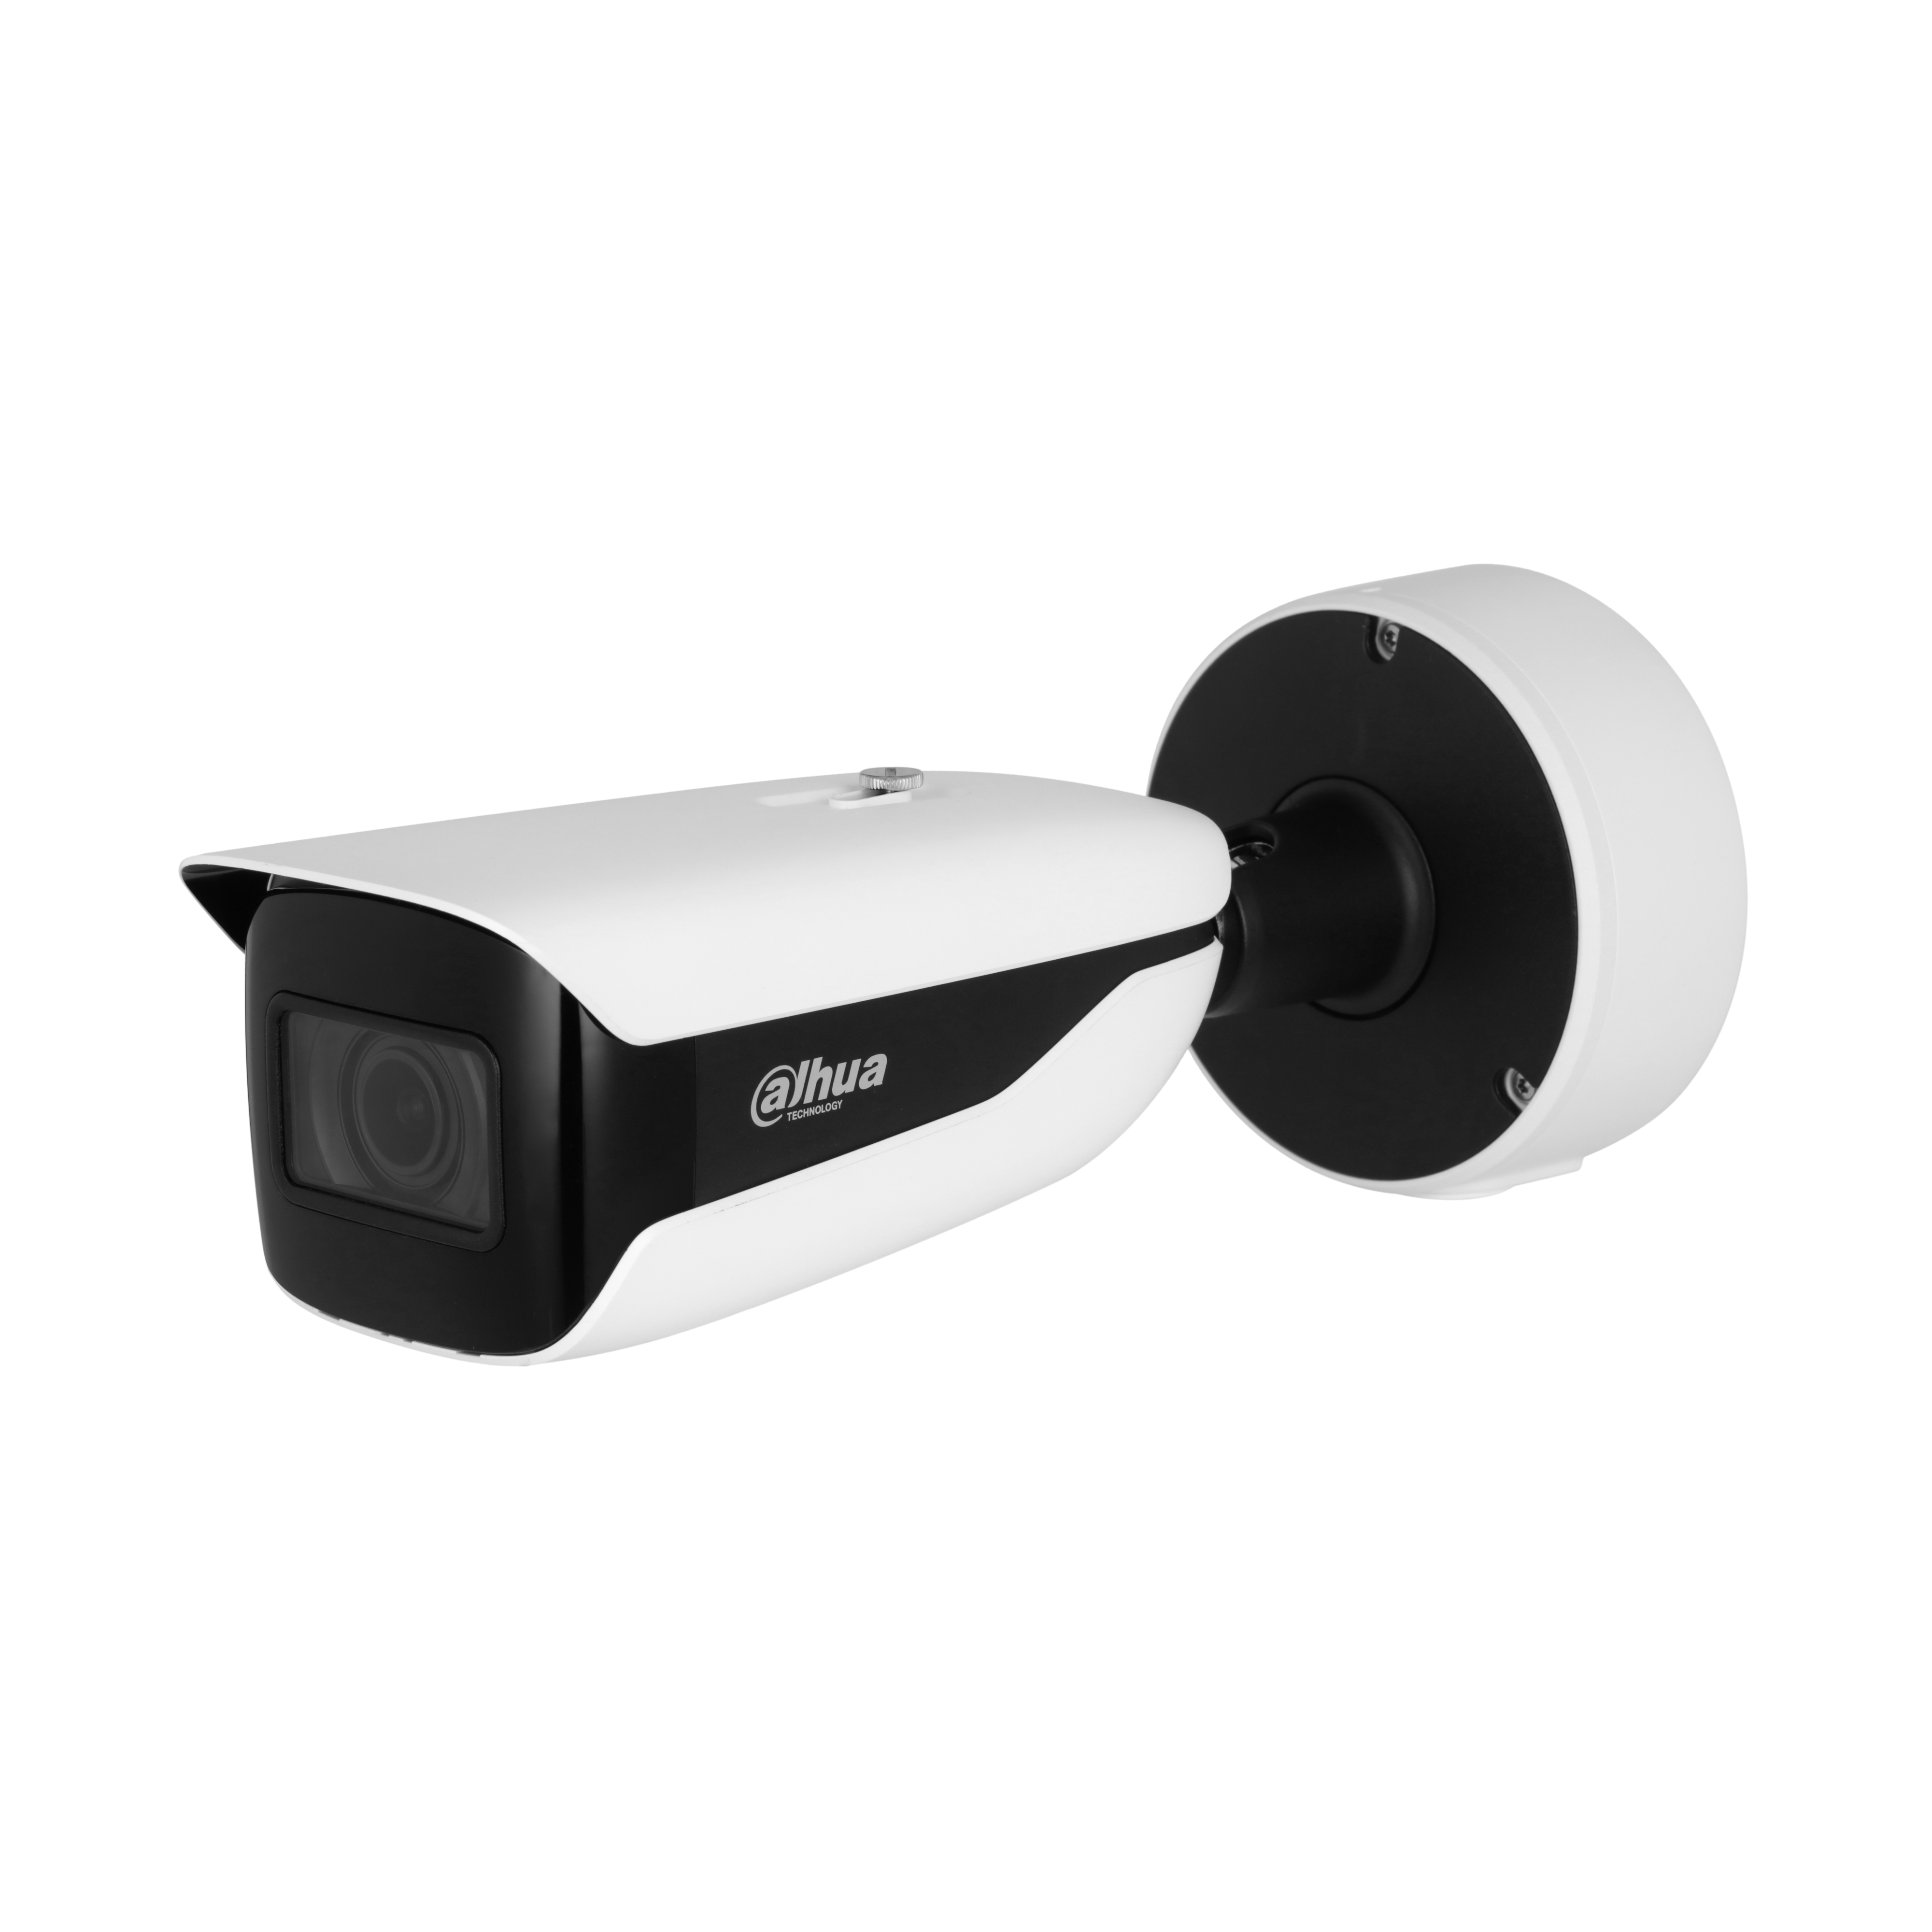 WIZMIND X SERIES IP CAMERA WHITE AI ANPR/ LPR & PEOPLE COUNT 4MP H.264/4+/5/5+ BULLET 140 TRUE WDR PLASTIC/METAL 2.7-12MM MOTORISED LENS 4X ZOOM DEEP LIGHT IR 60M POE+/ EPOE IP67 WITHOUT MIC AUDIO IN AUDIO OUT 3 x ALARM IN 2 x ALARM OUT SUPPORT UP TO 512GB SDIK10 12VDC/24VAC CVBS OUTPUT